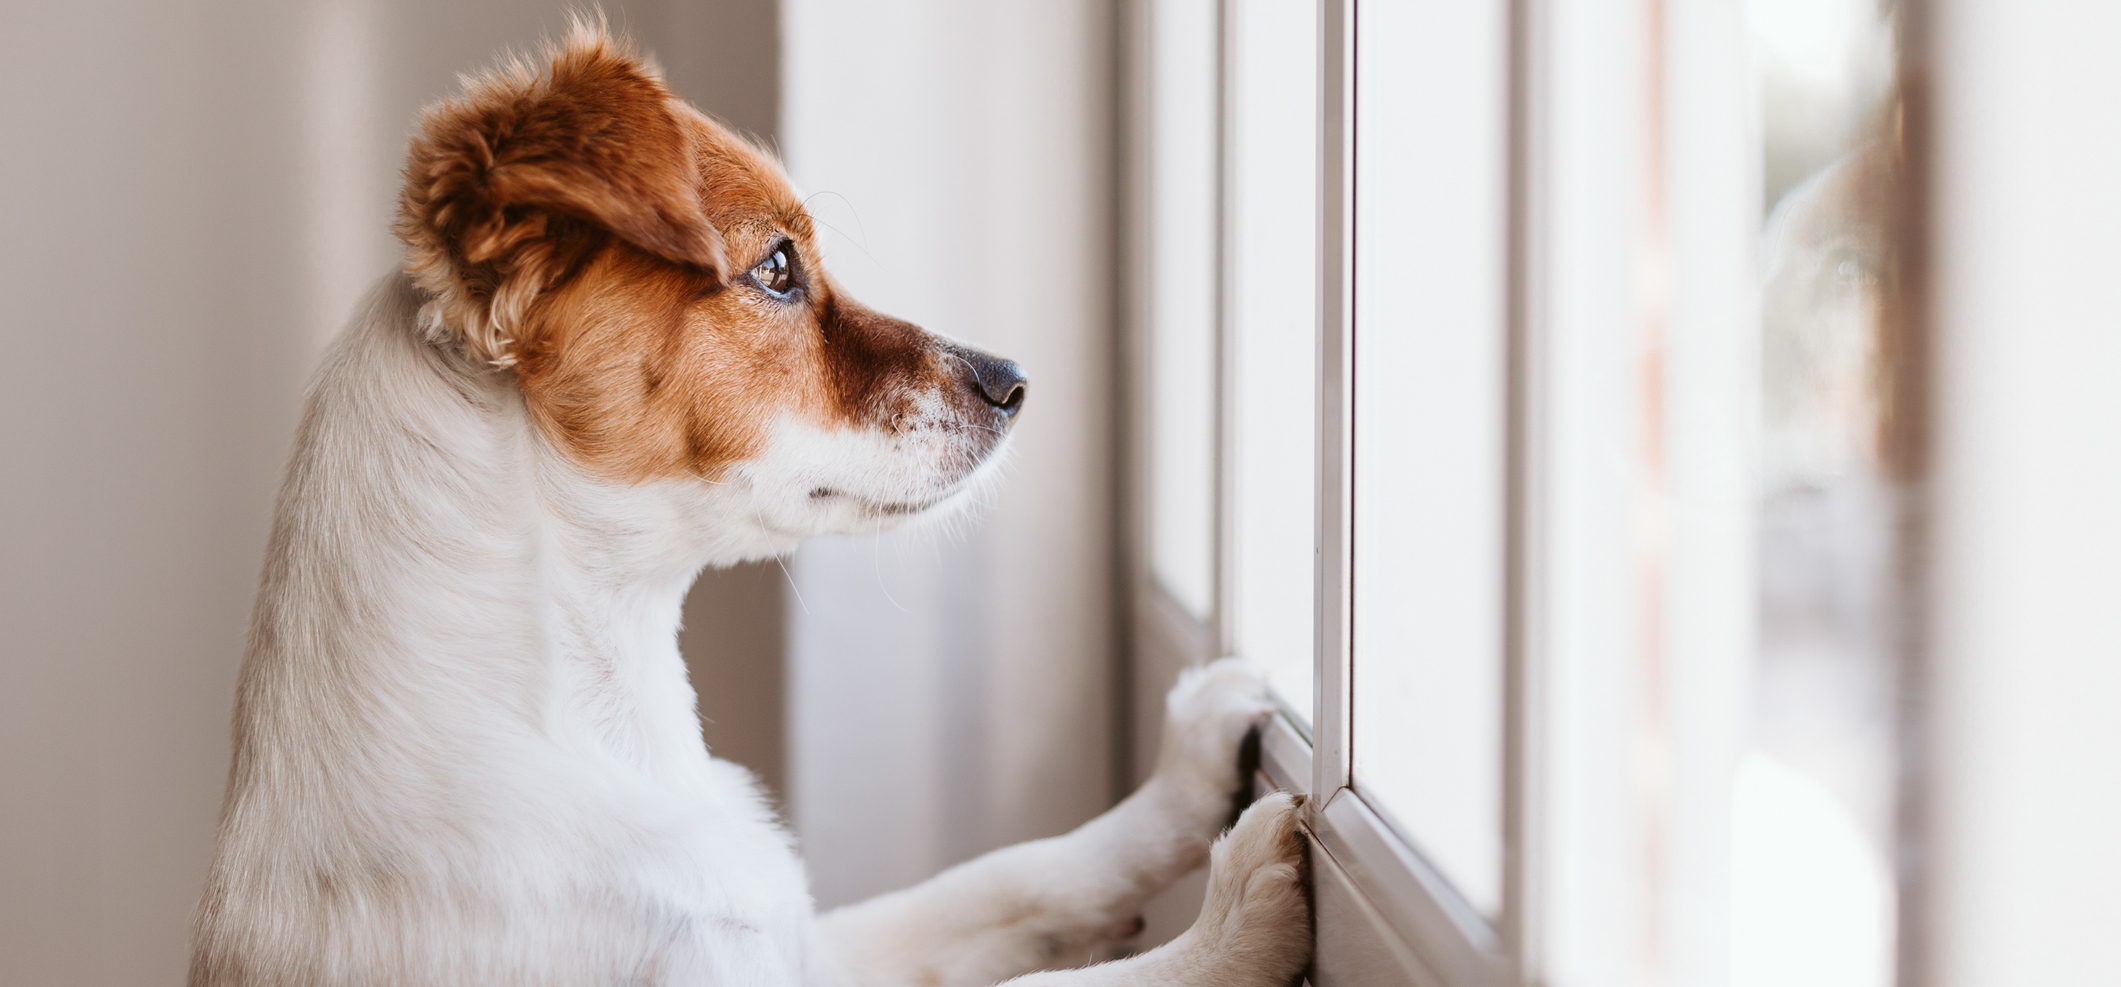 Small dog looks out window with paws on frame.